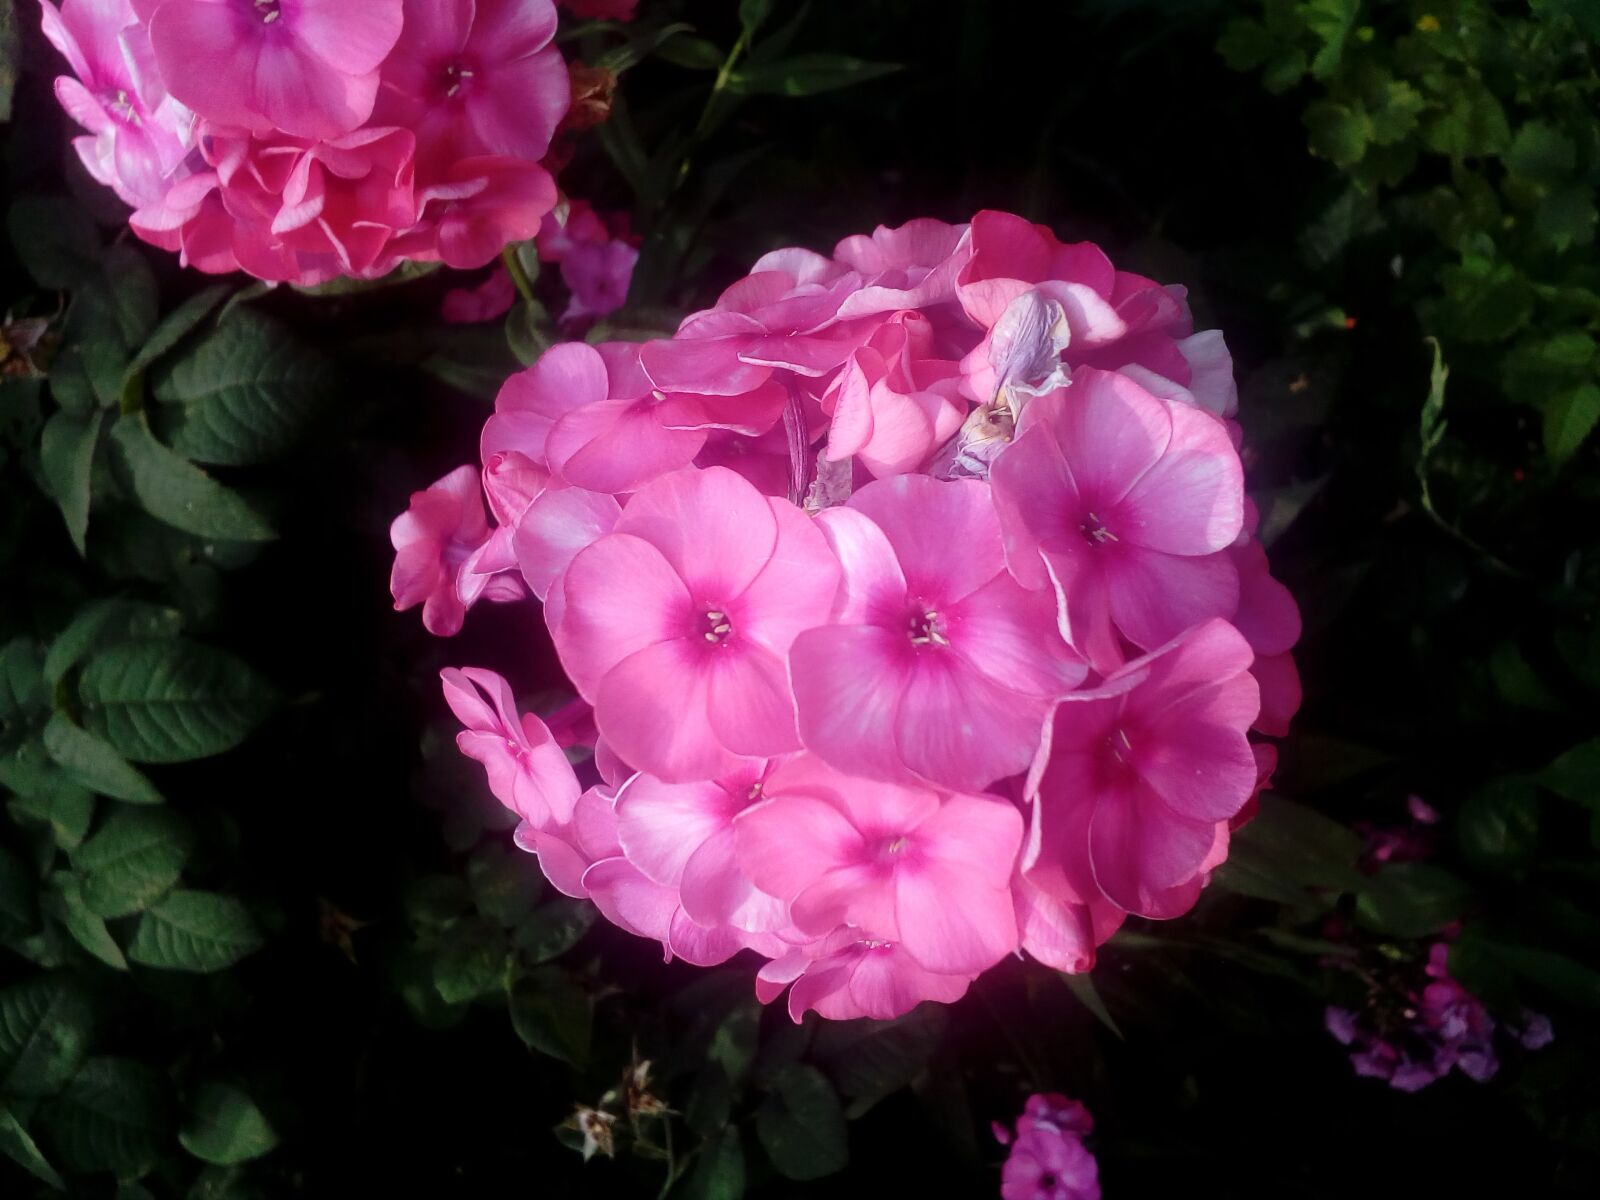 ZTE BLADE A510 sample photo. Horticulture, hydrangea, petals, pinkish photography